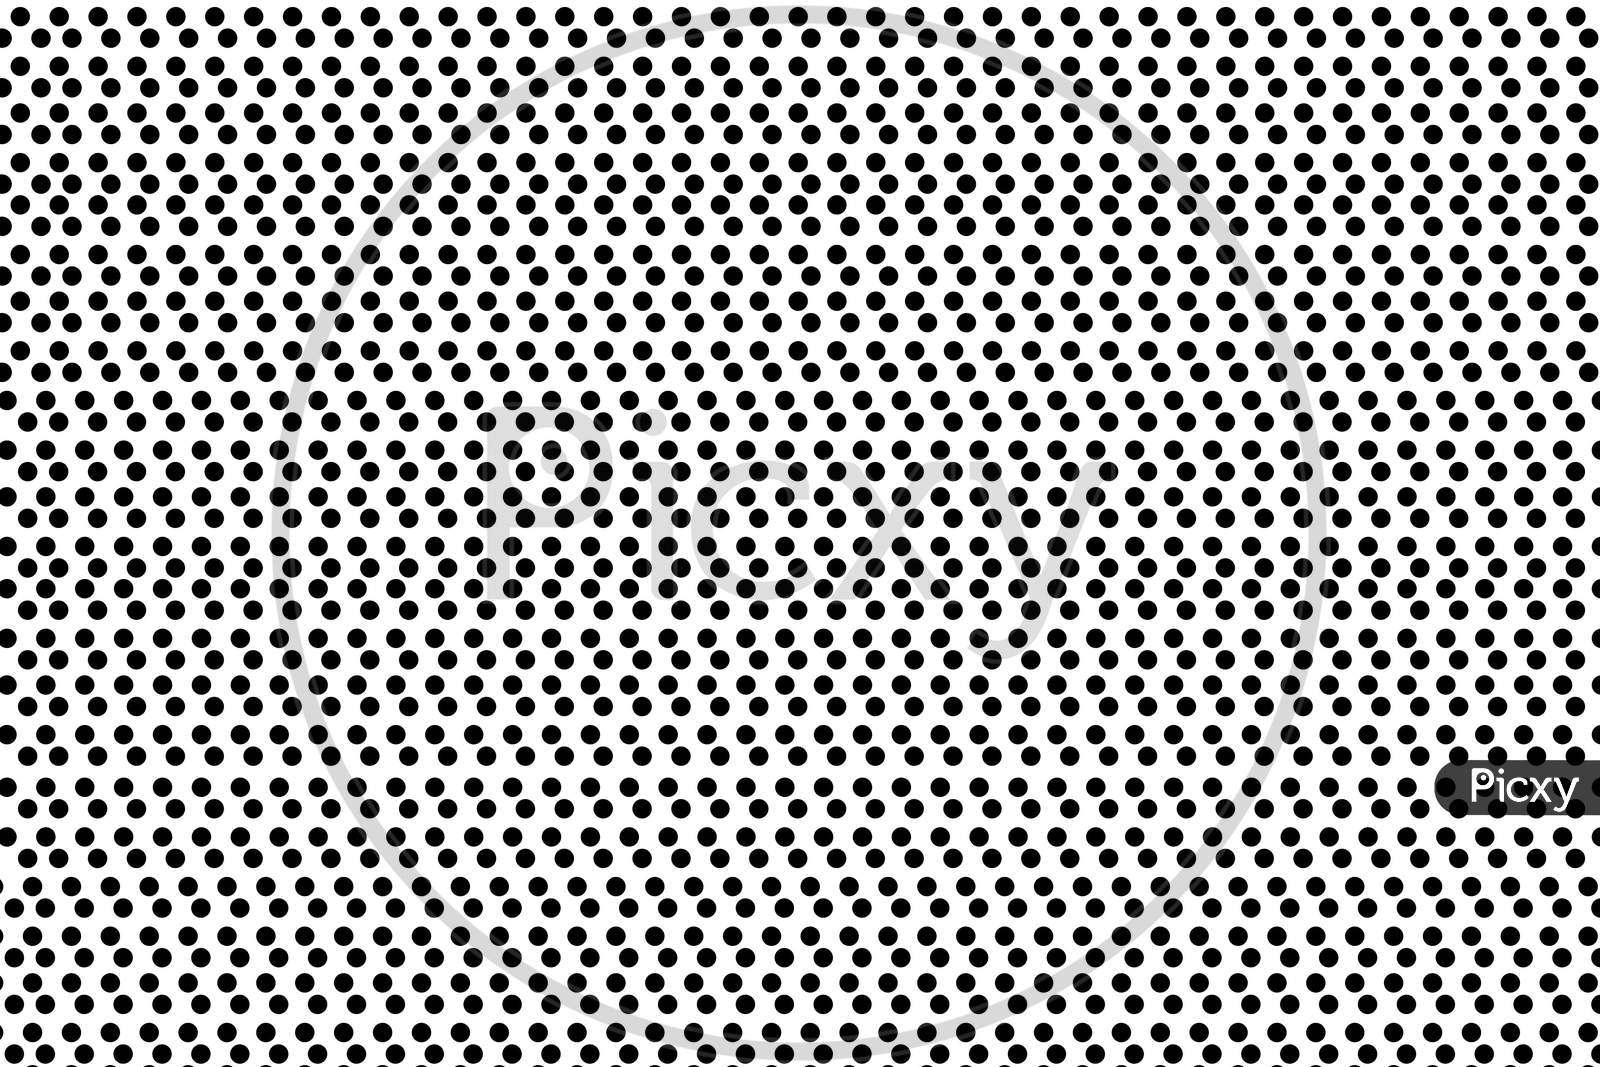 Black dots abstract geometric modern background